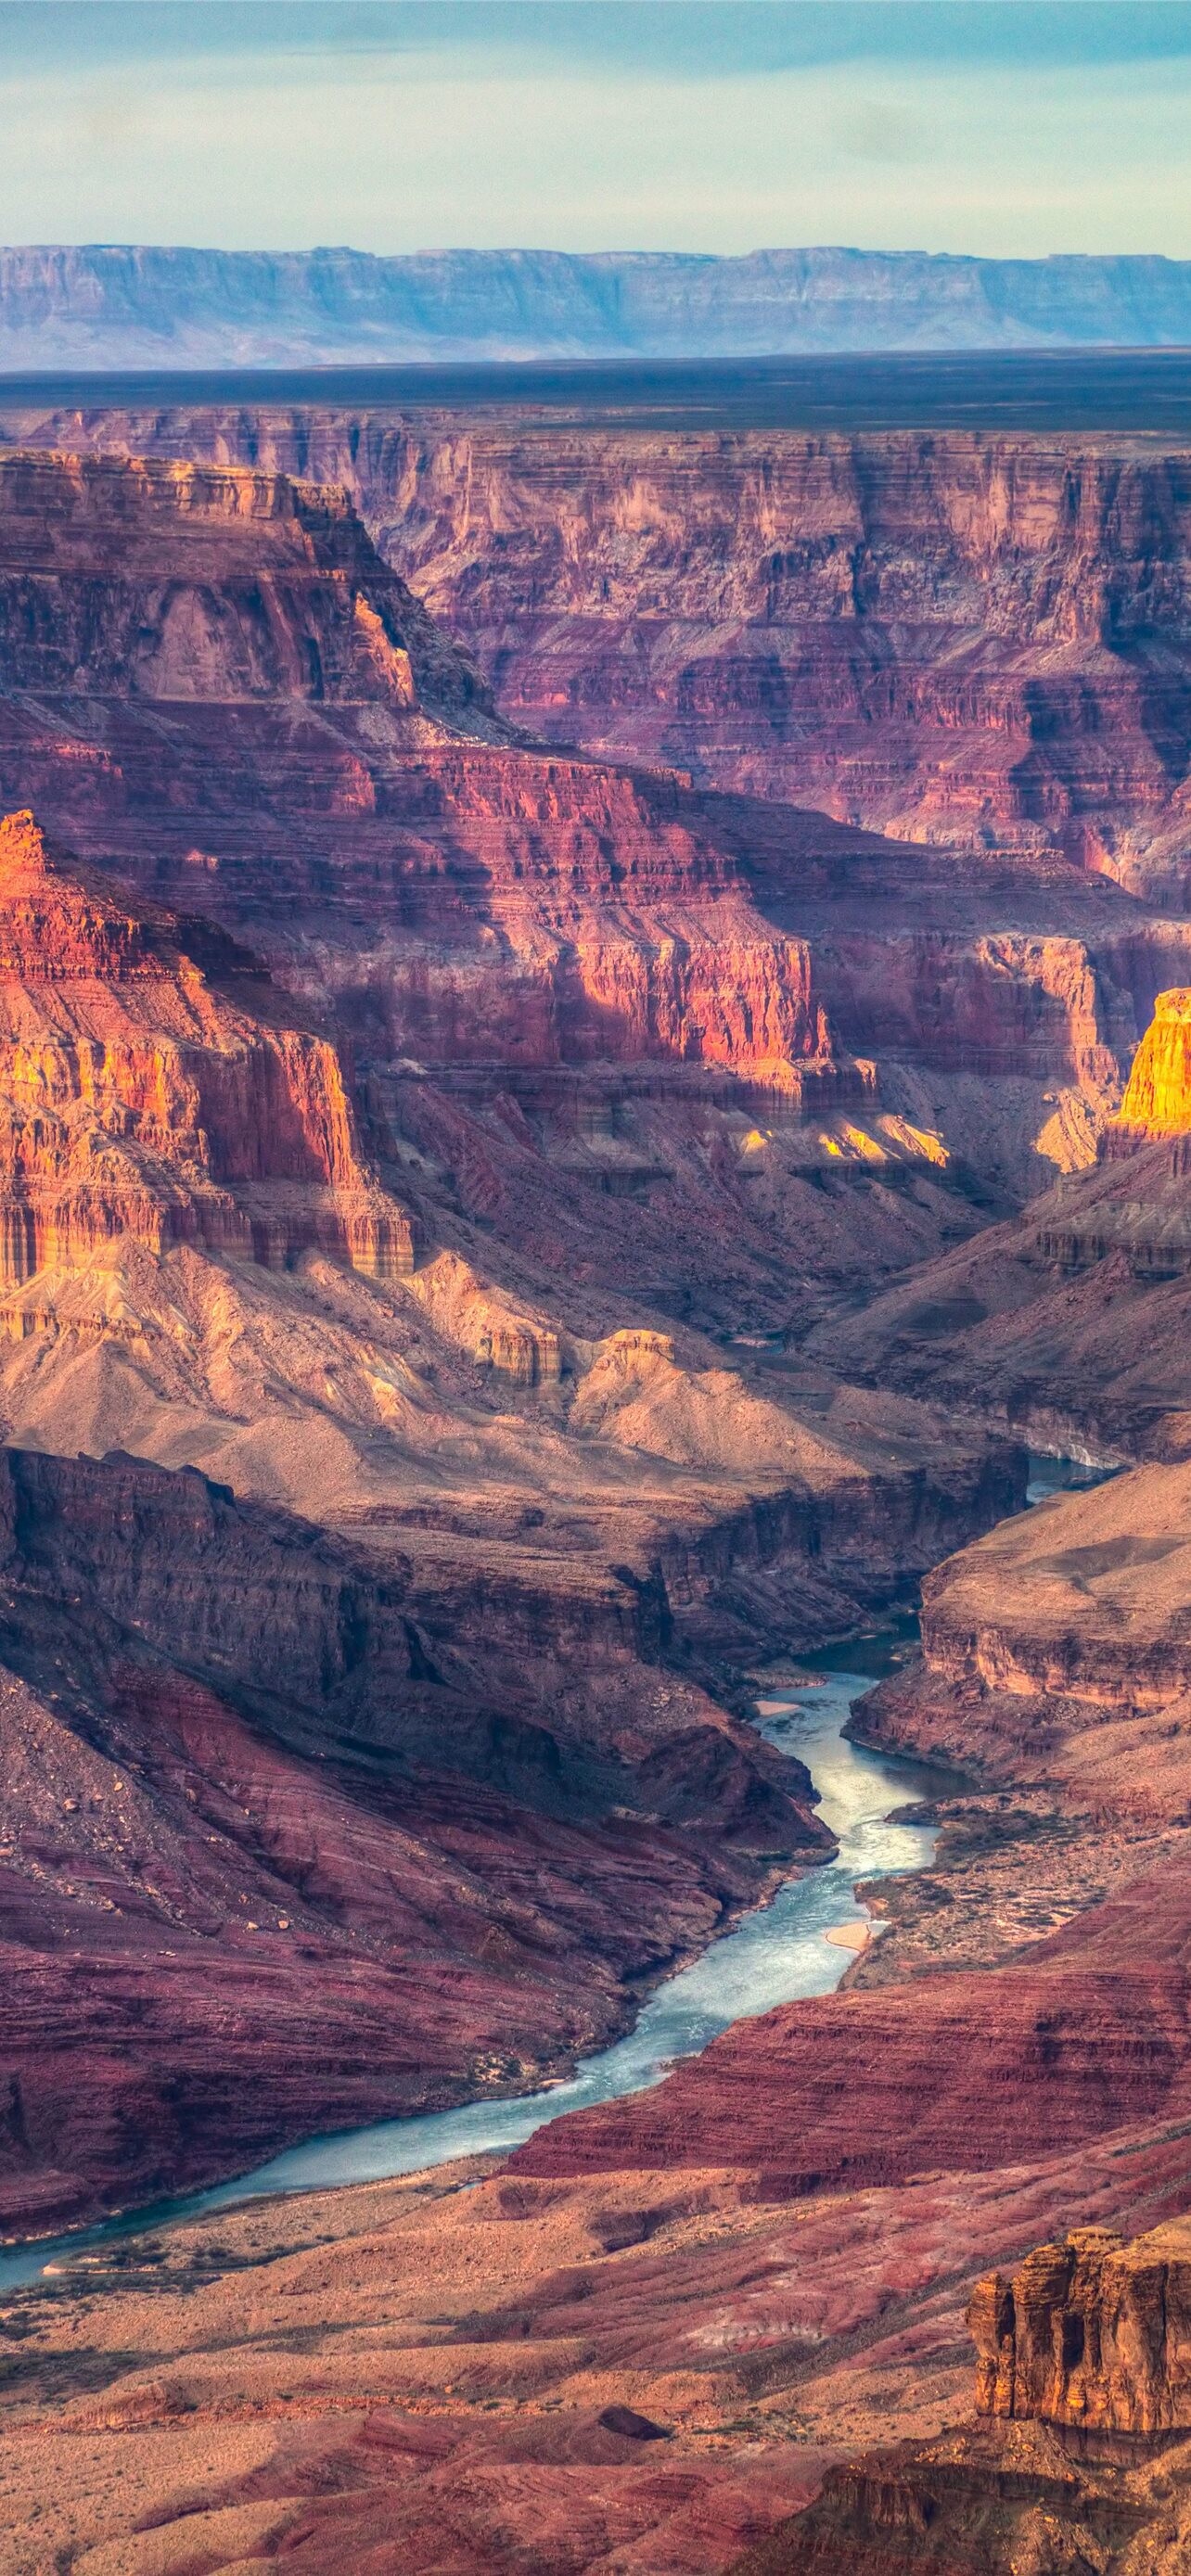 Grand Canyon: GCNP, commemorated 100 years since its designation as a national park, 2019. 1290x2780 HD Wallpaper.